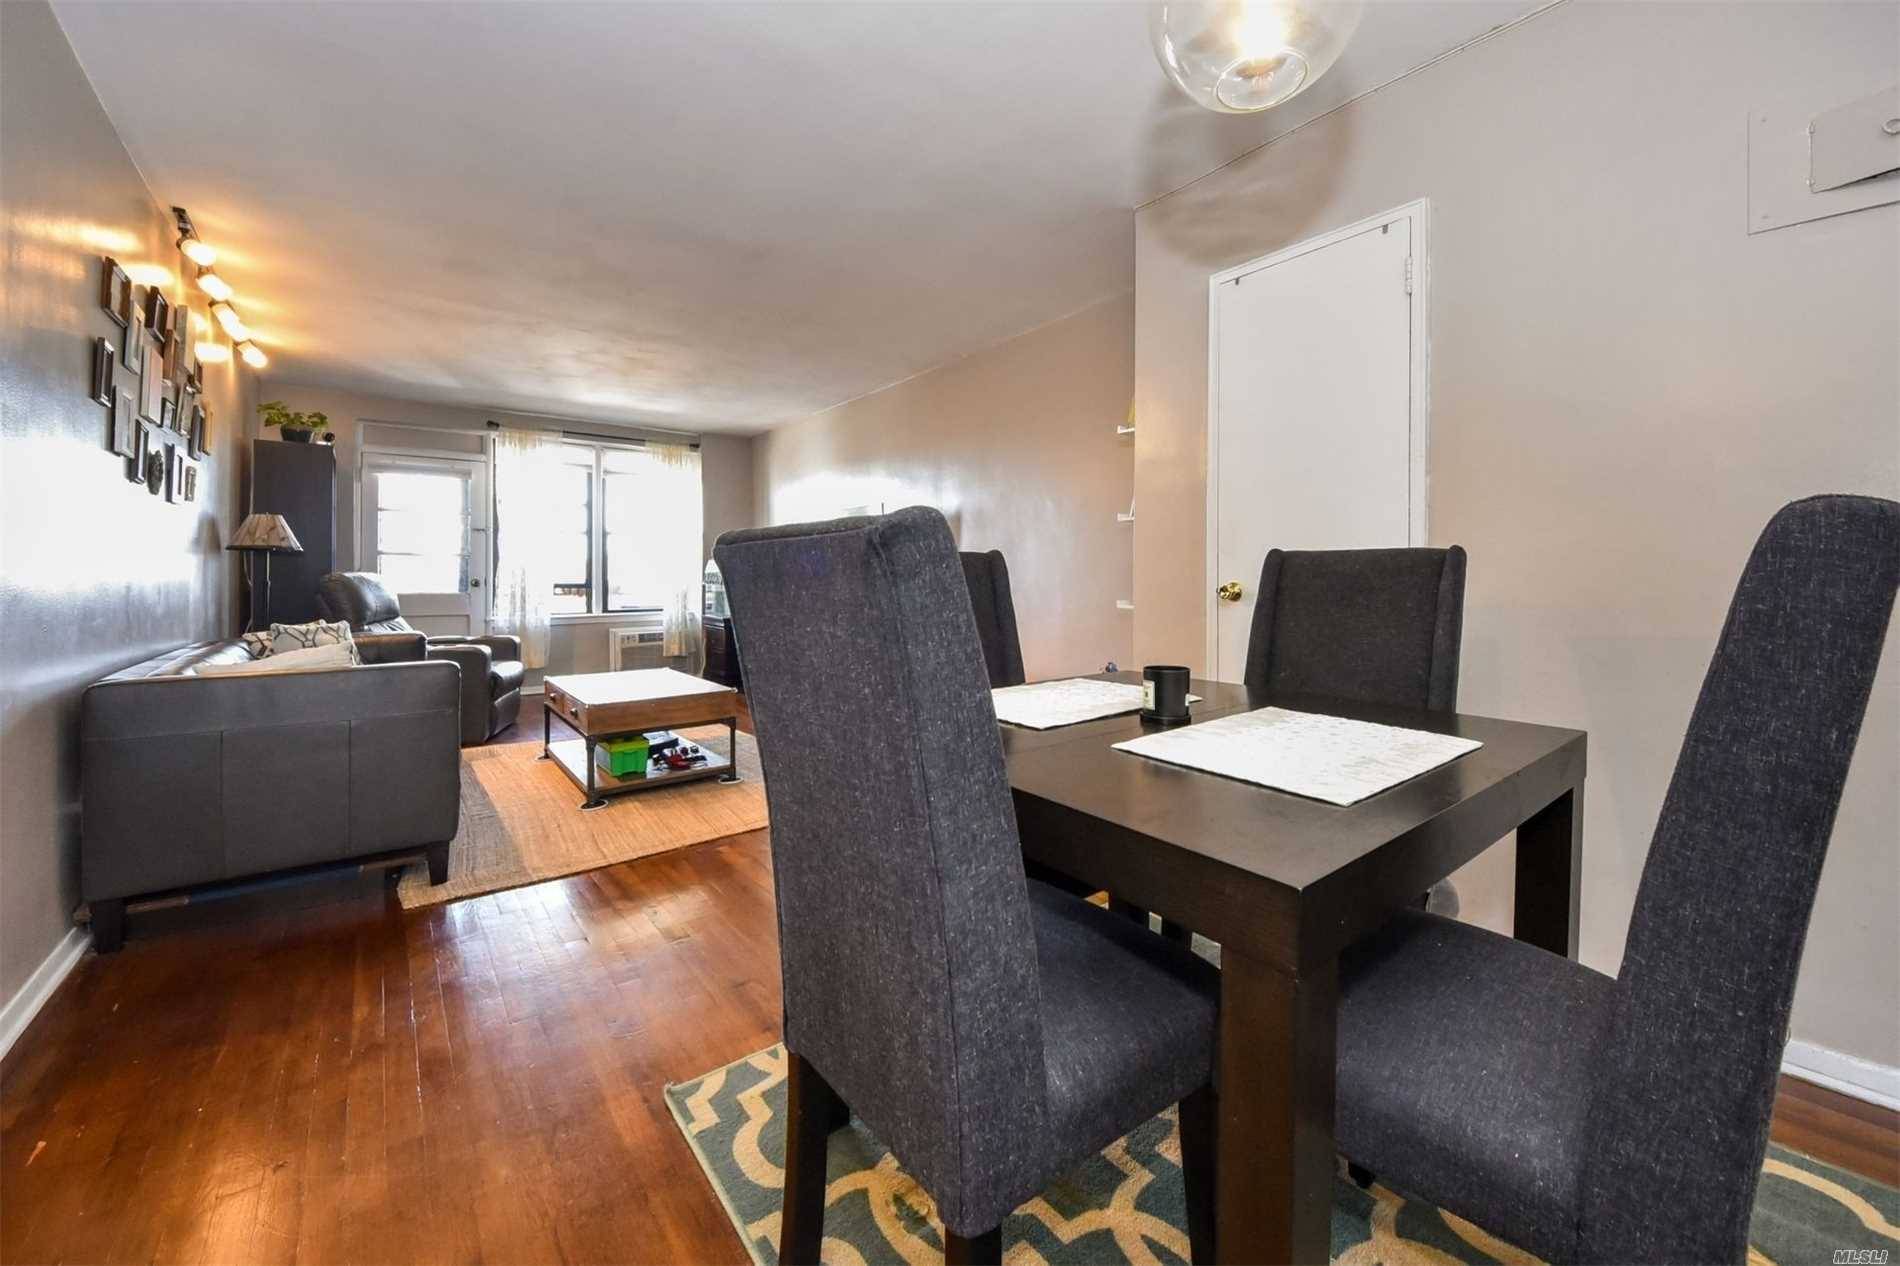 Top Floor Spacious Unit With Private Balcony, Hardwood Floors, Stainless Steel Appliances, And Ample Kitchen Cabinets.